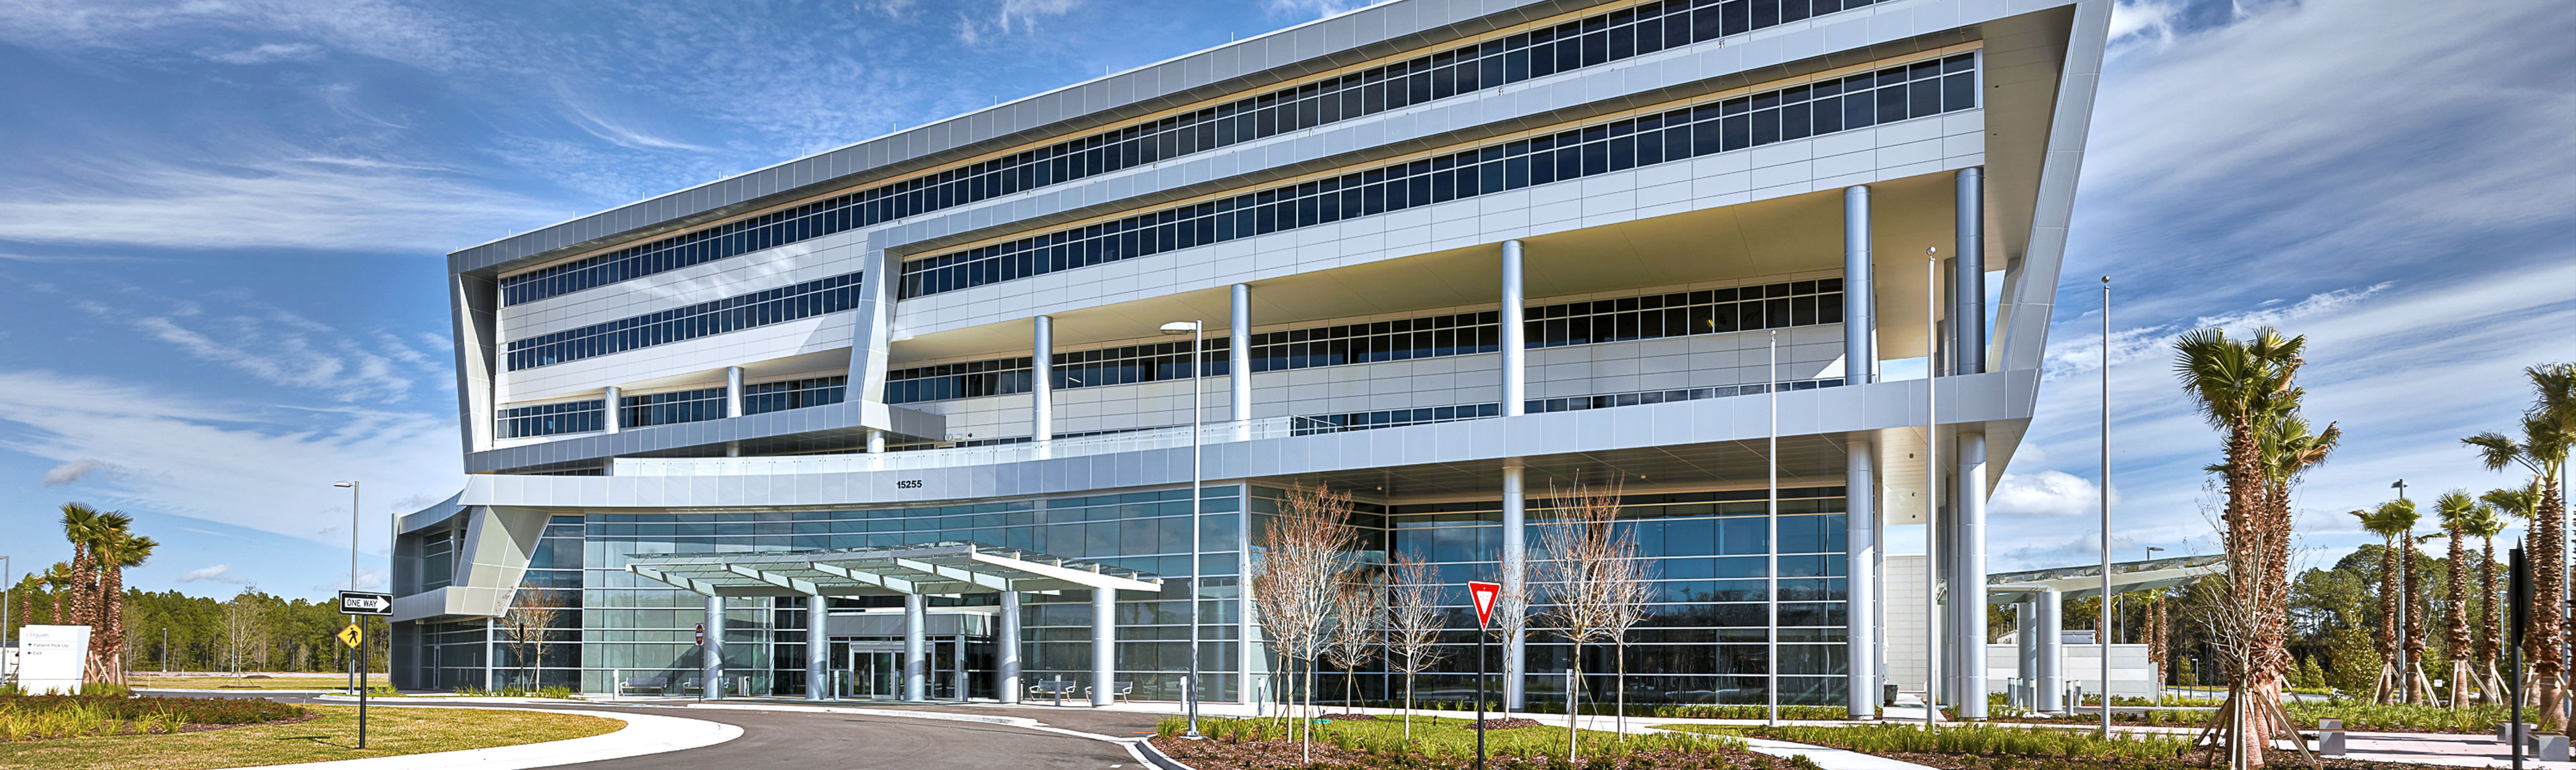 Front exterior of UF Health North Medical Building in Jacksonville, Florida